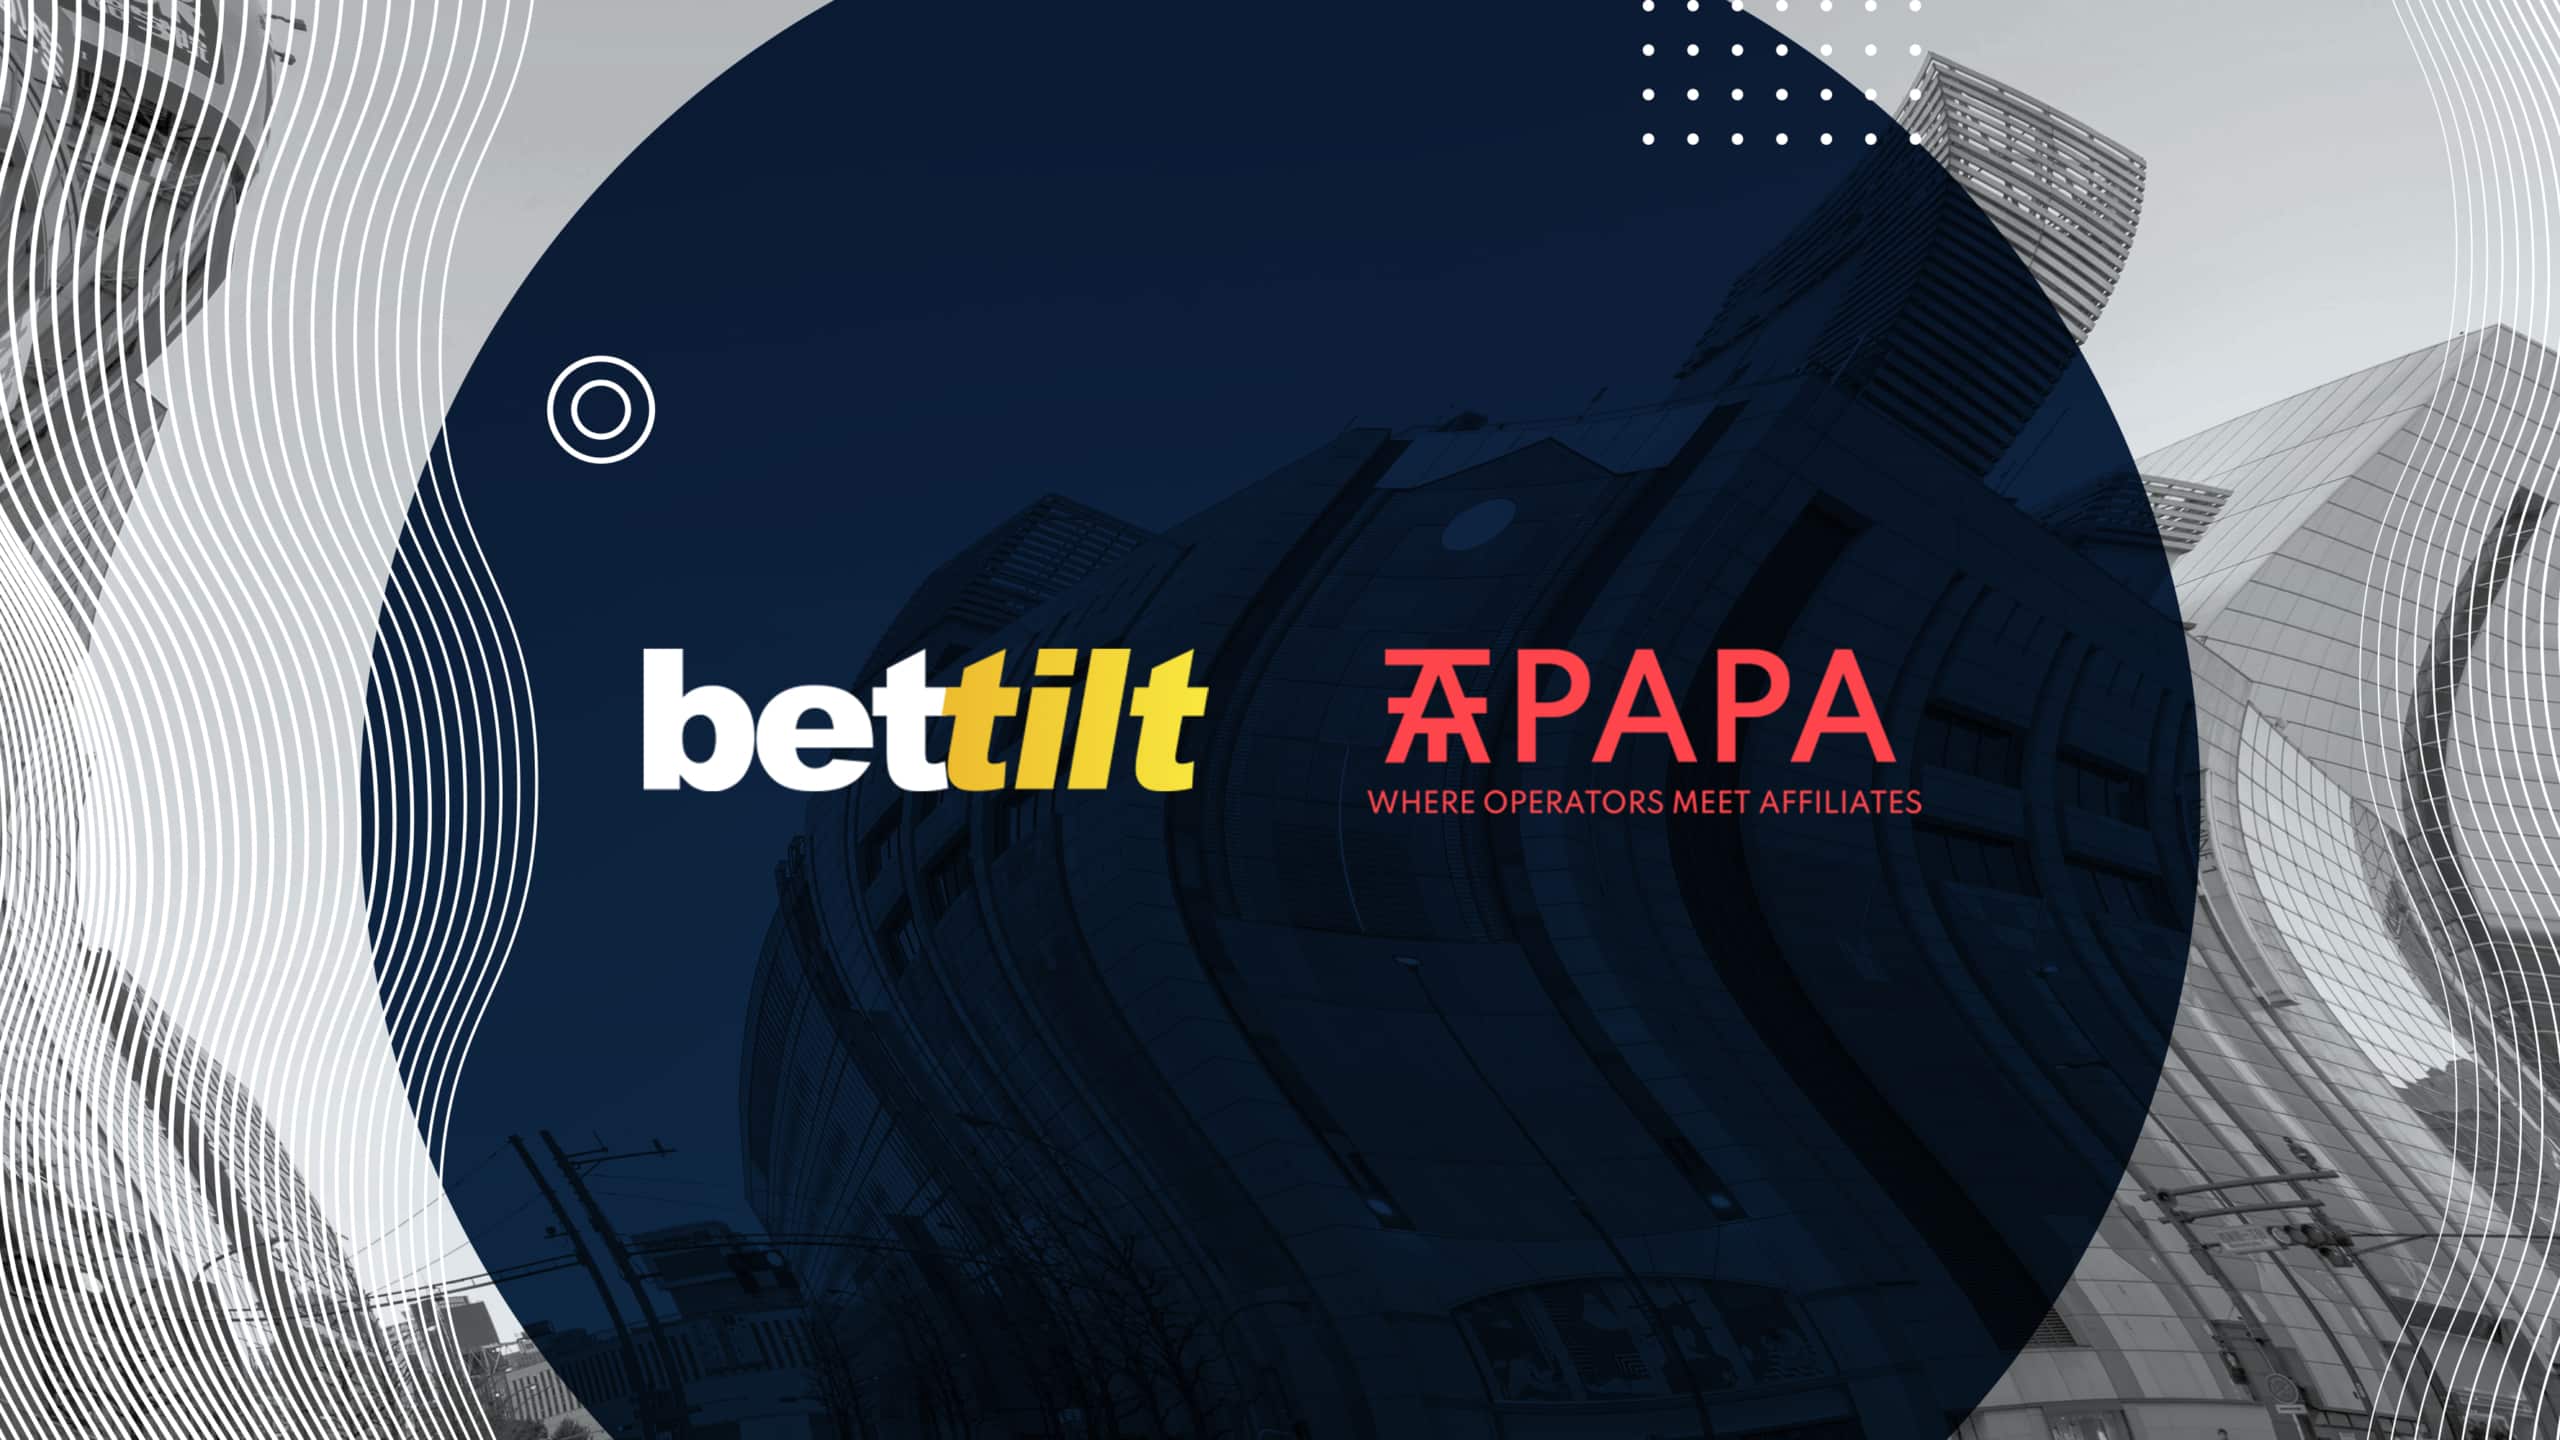 Bettilt and AffPapa team up in new partnership